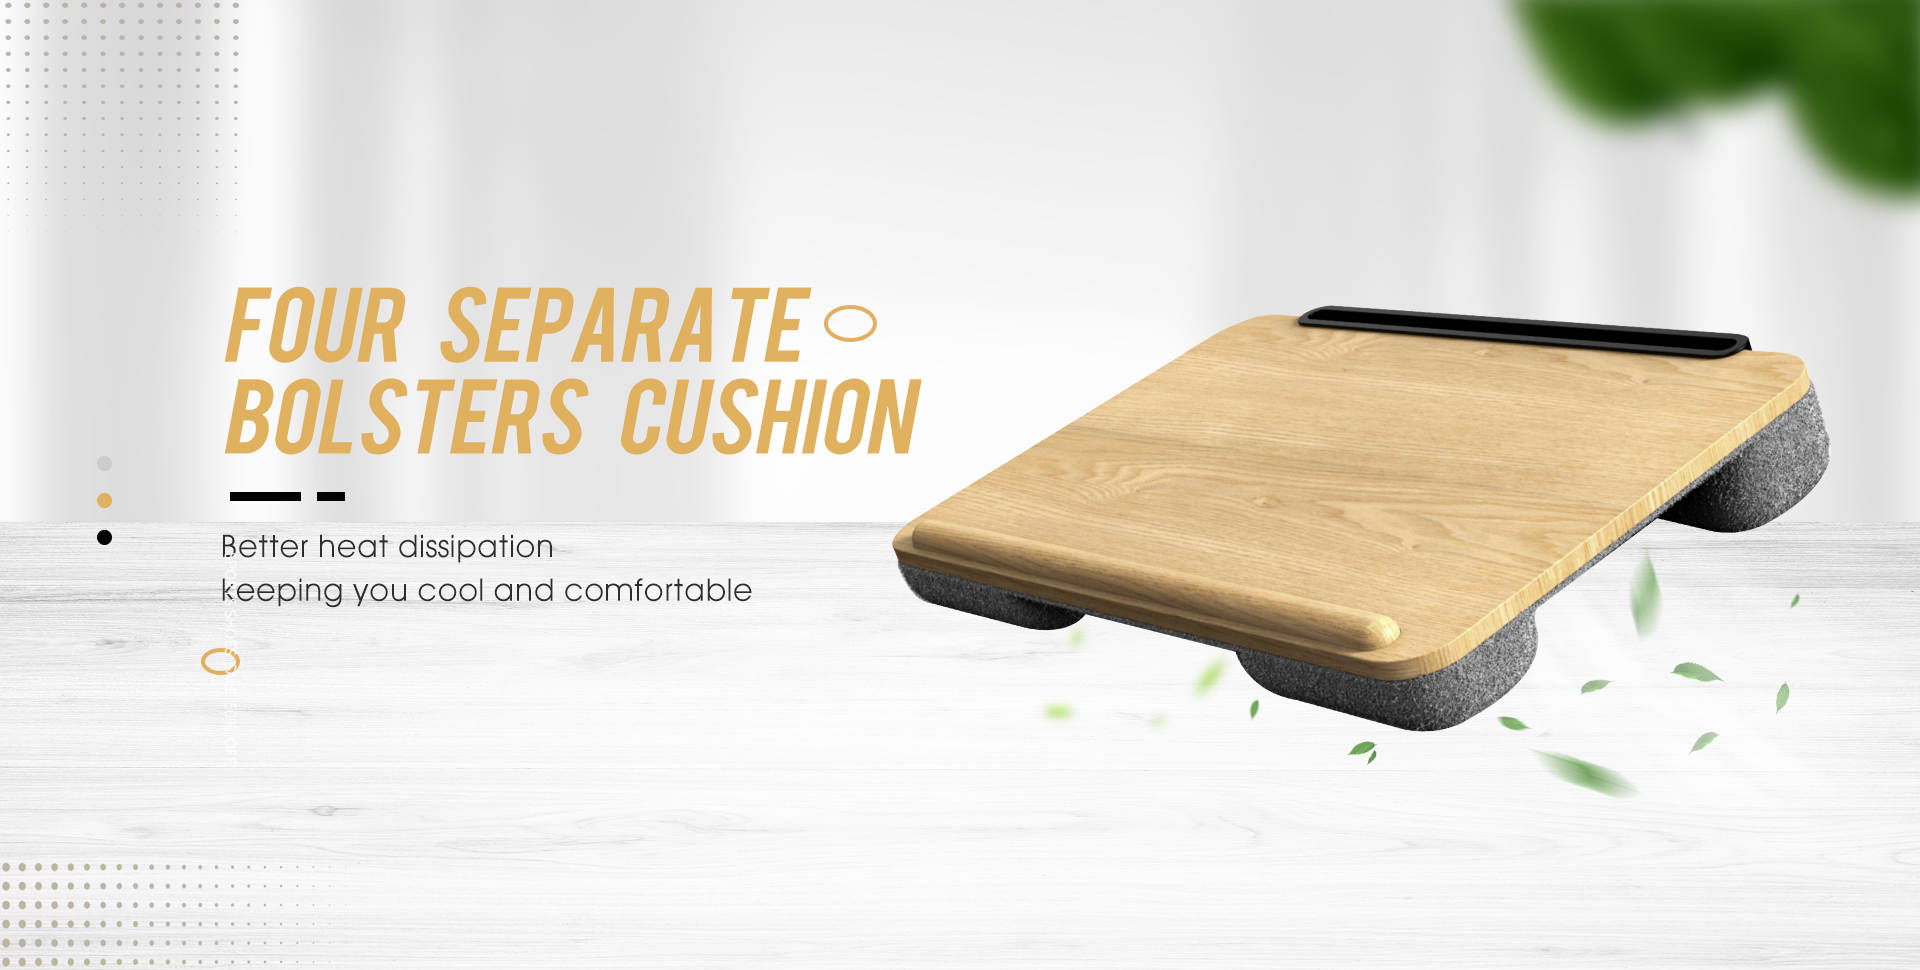 four separate bolsters cushion, superior heat dissipation and comfort